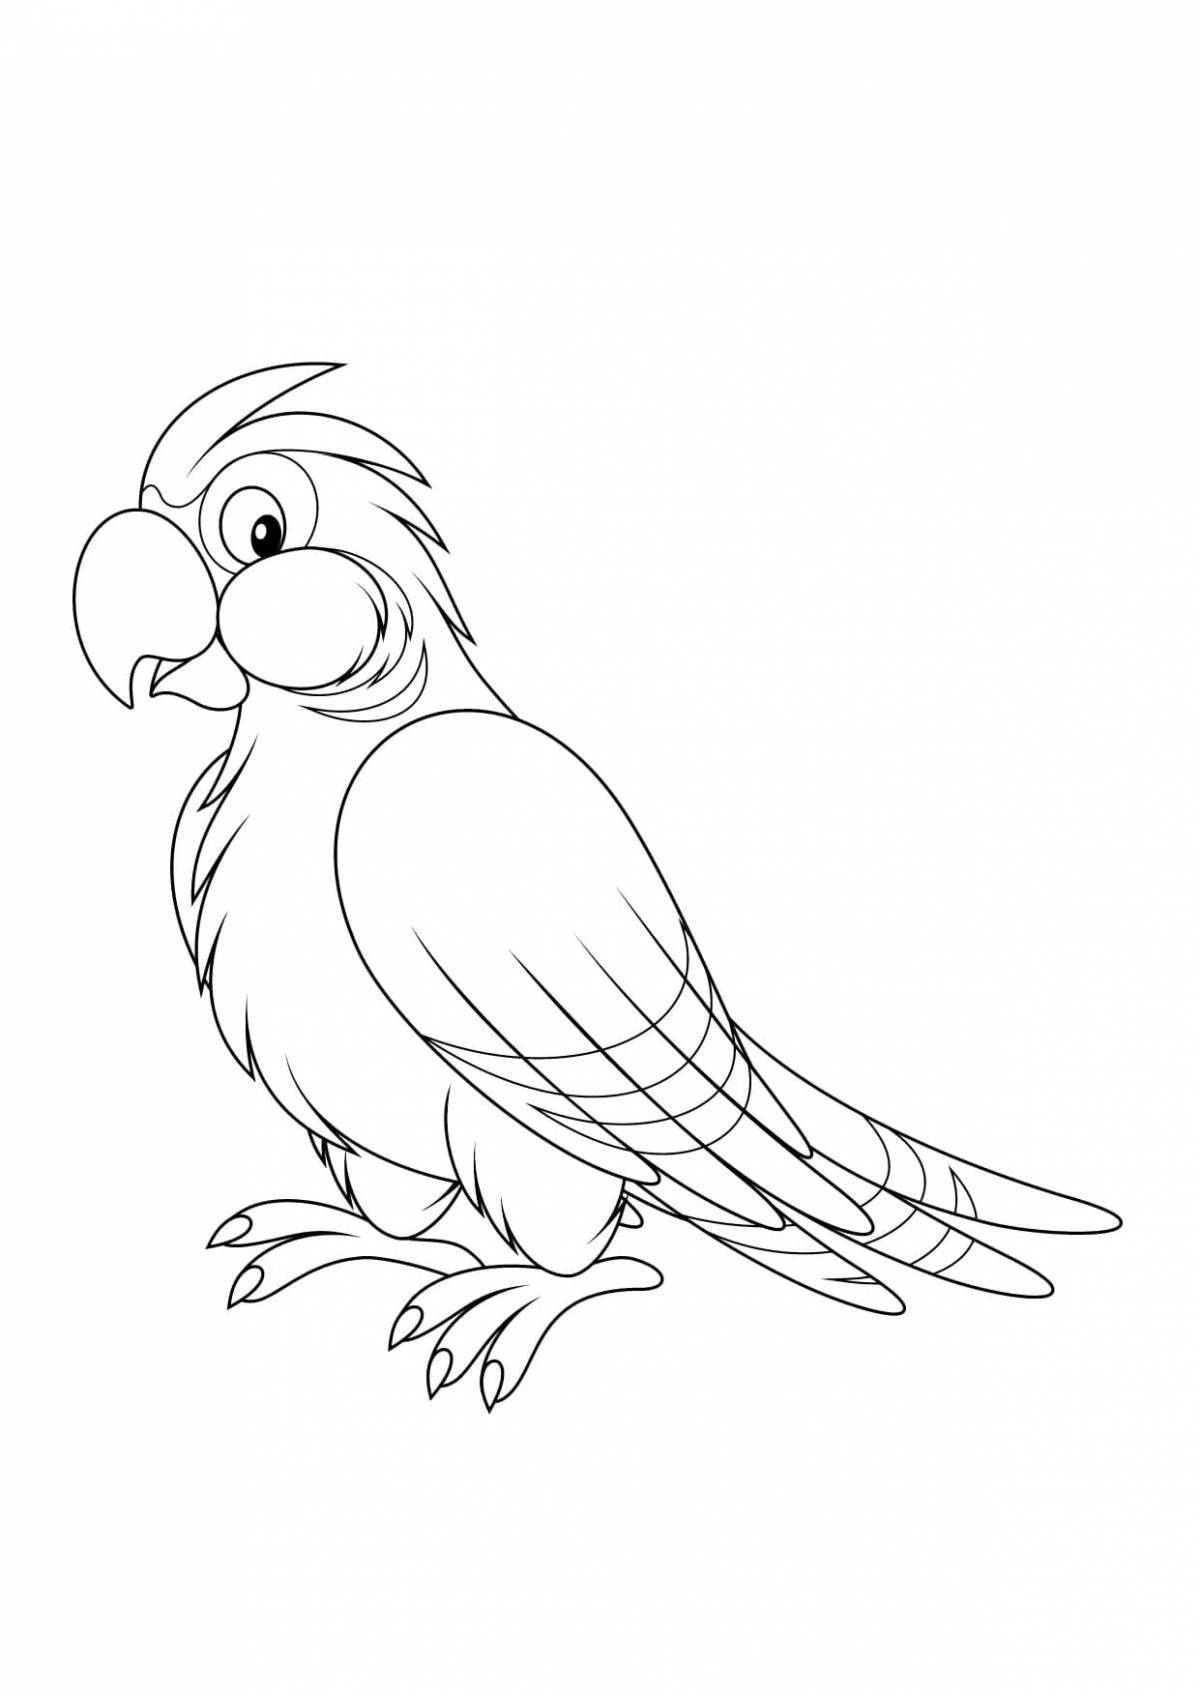 Coloring parrot for kids